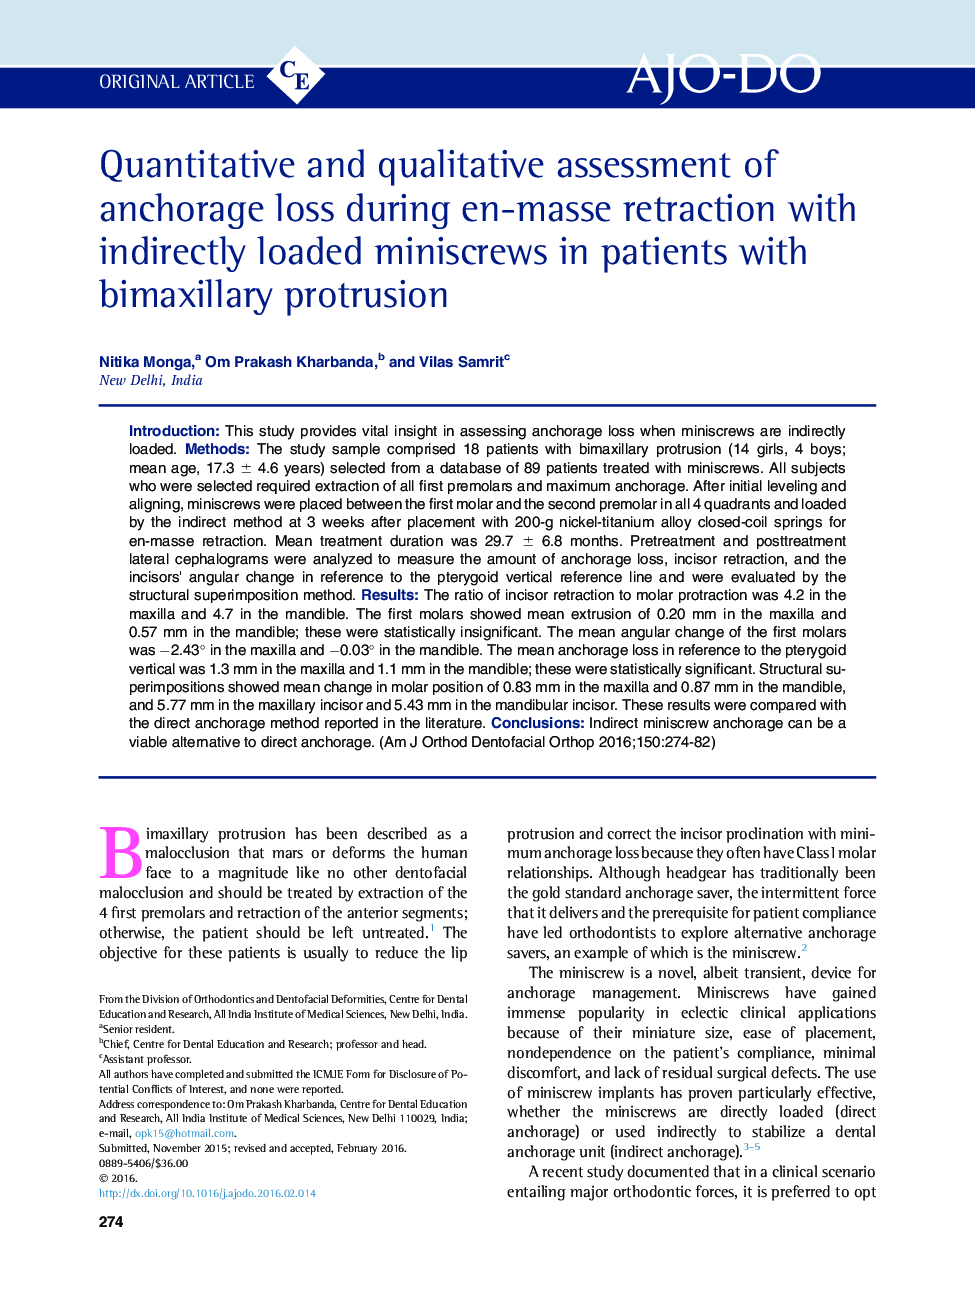 Quantitative and qualitative assessment of anchorage loss during en-masse retraction with indirectly loaded miniscrews in patients with bimaxillary protrusion 